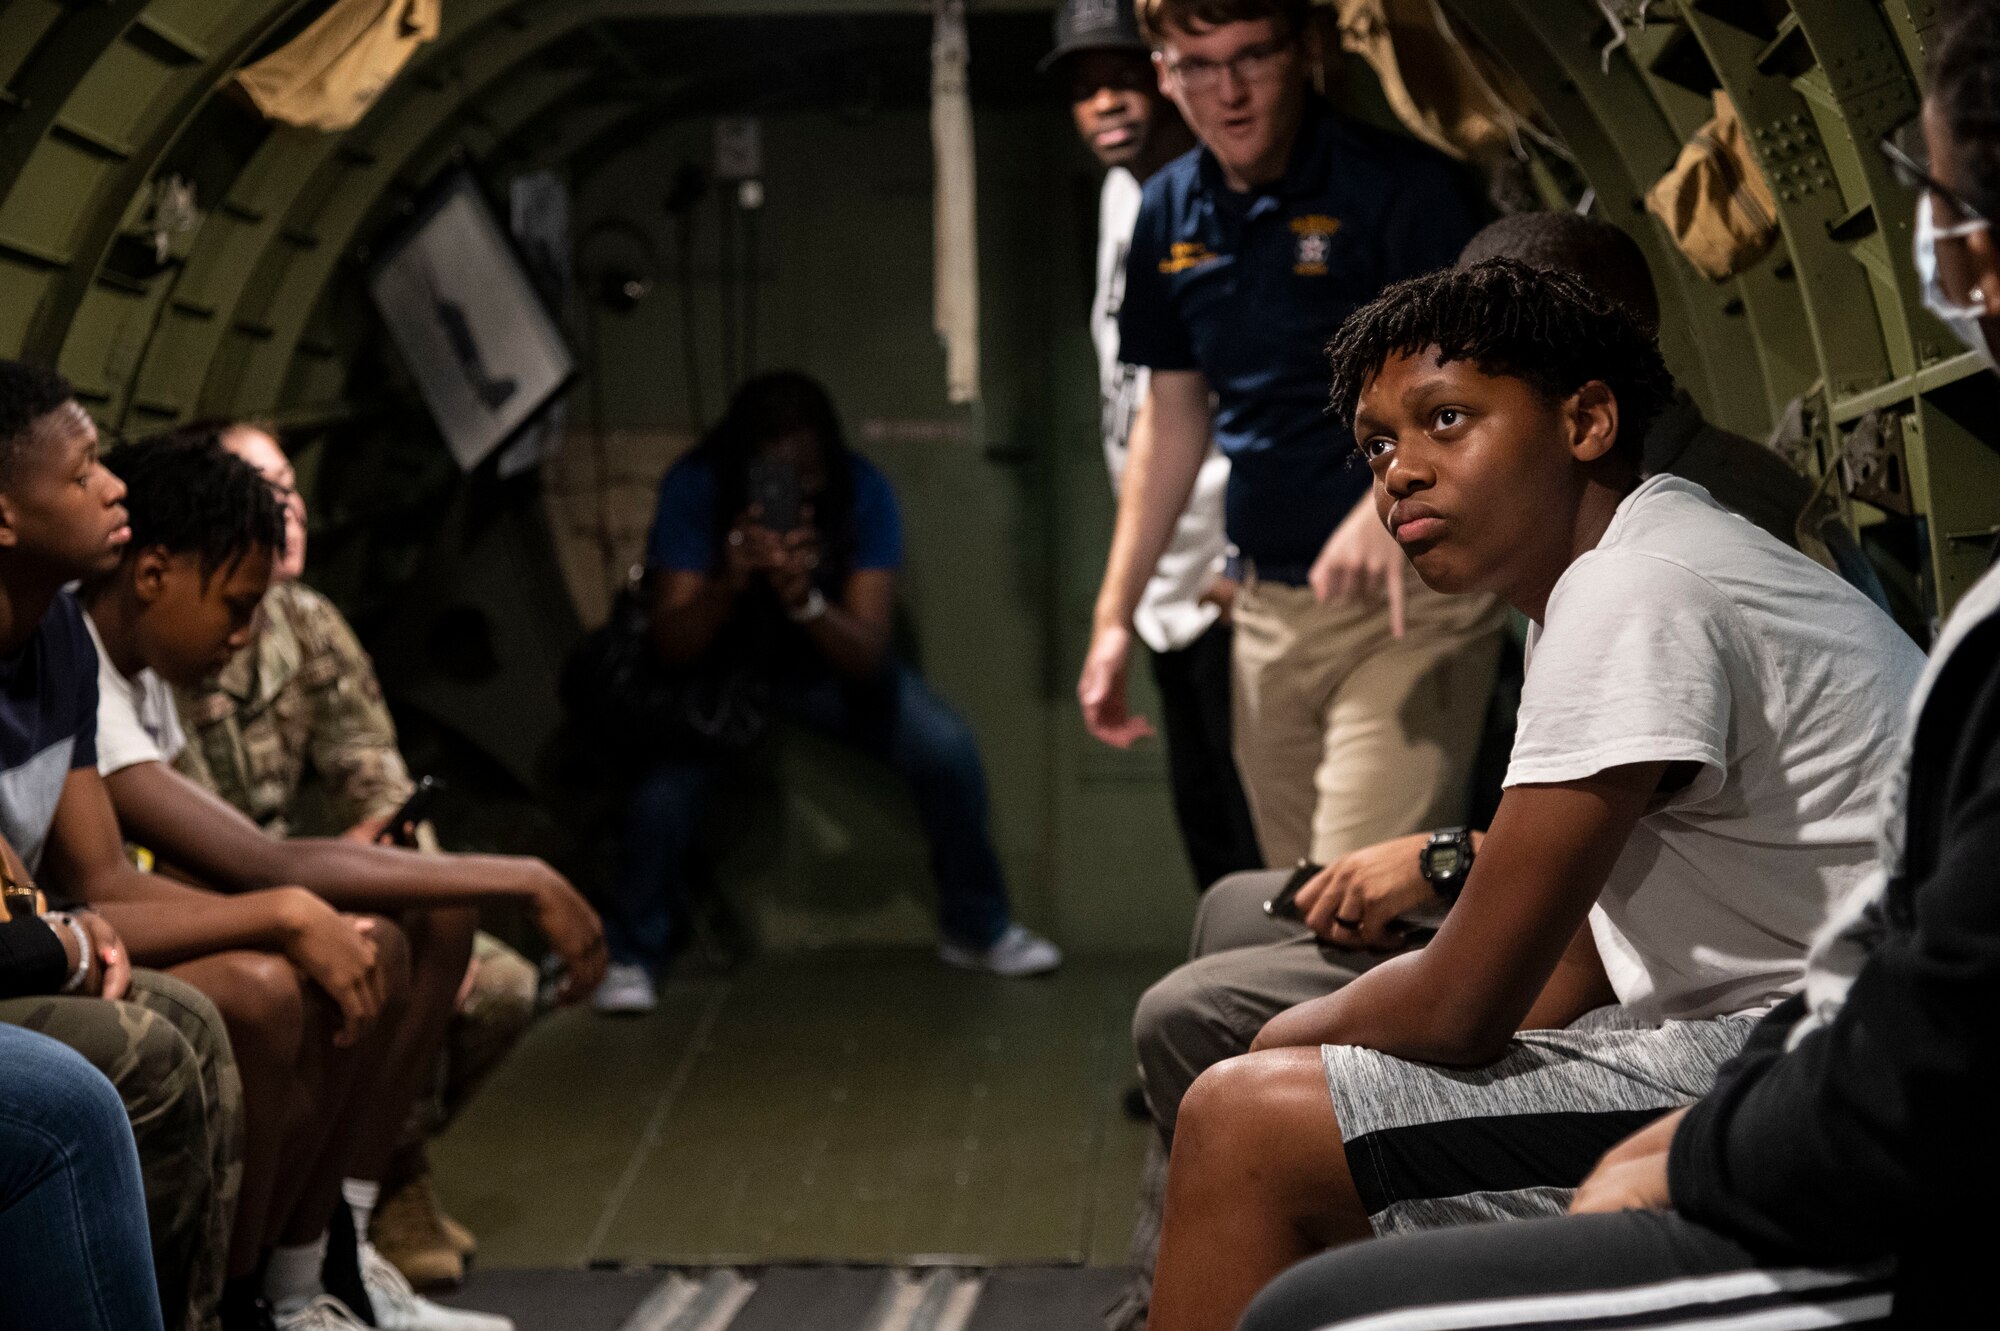 An Organization of Black Aerospace Professionals student learns about the C-47A Skytrain during an immersion tour at the Air Mobility Command Museum in Dover, Delaware, June 21, 2022. OBAP aims to motivate youth to become educationally prepared for life, increase minority participation in aerospace and increase the number of minority professionals in aerospace and related industries. (U.S. Air Force photo by Staff Sgt. Marco A. Gomez)